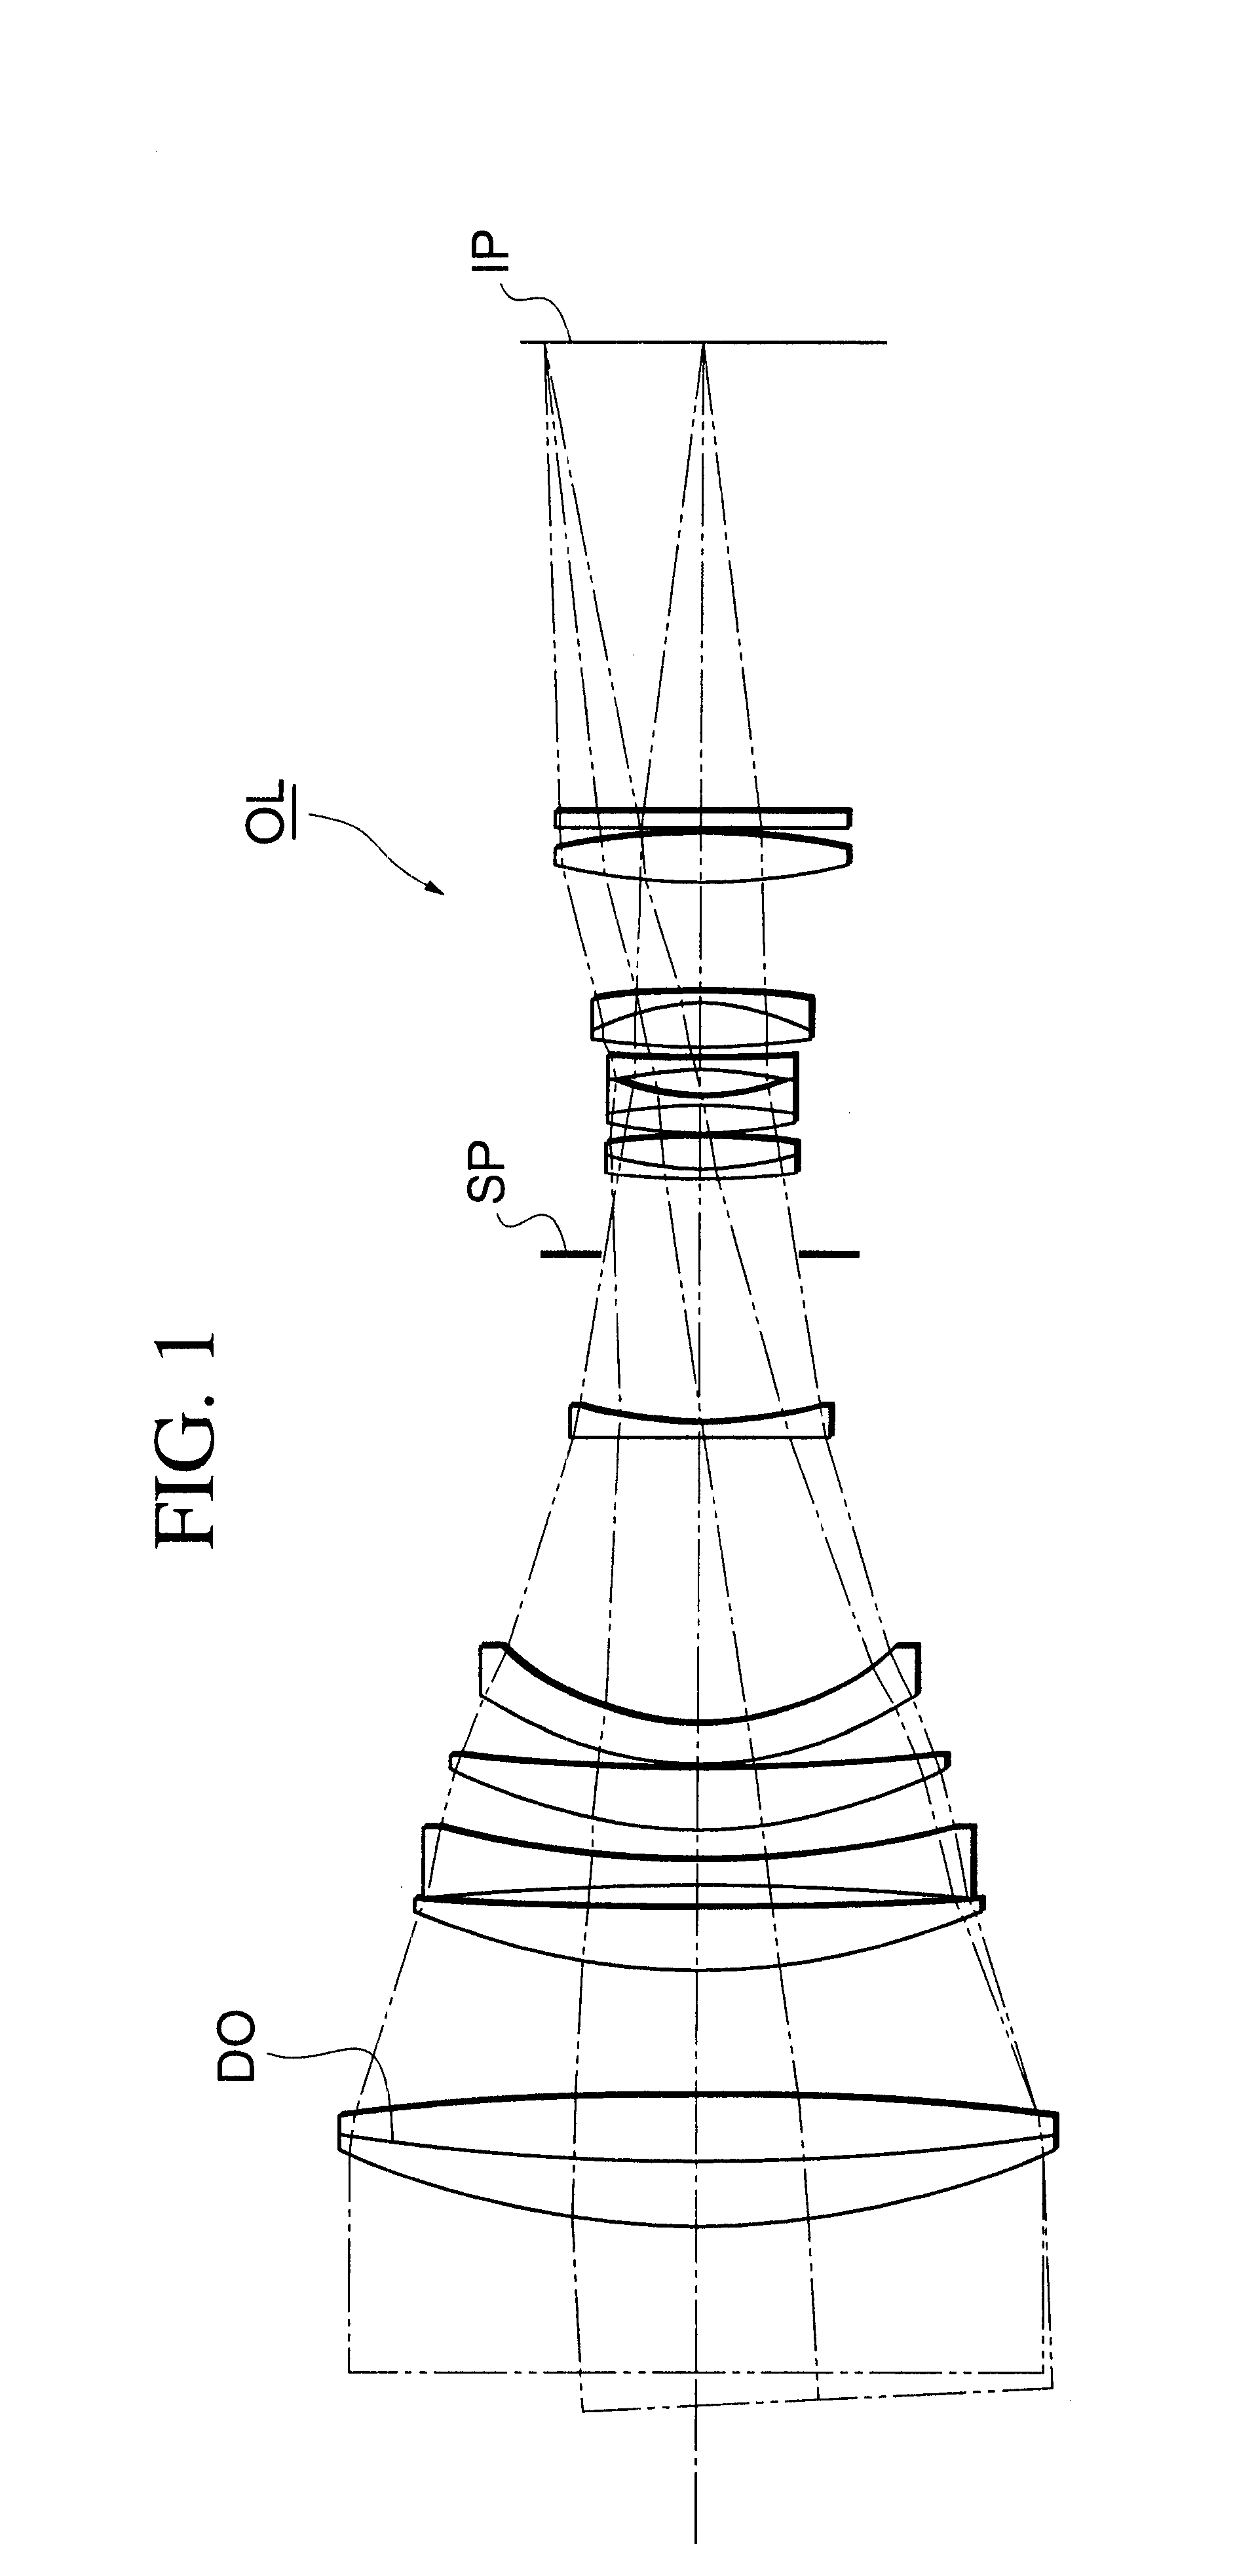 Optical system having a diffractive optical element, and optical apparatus